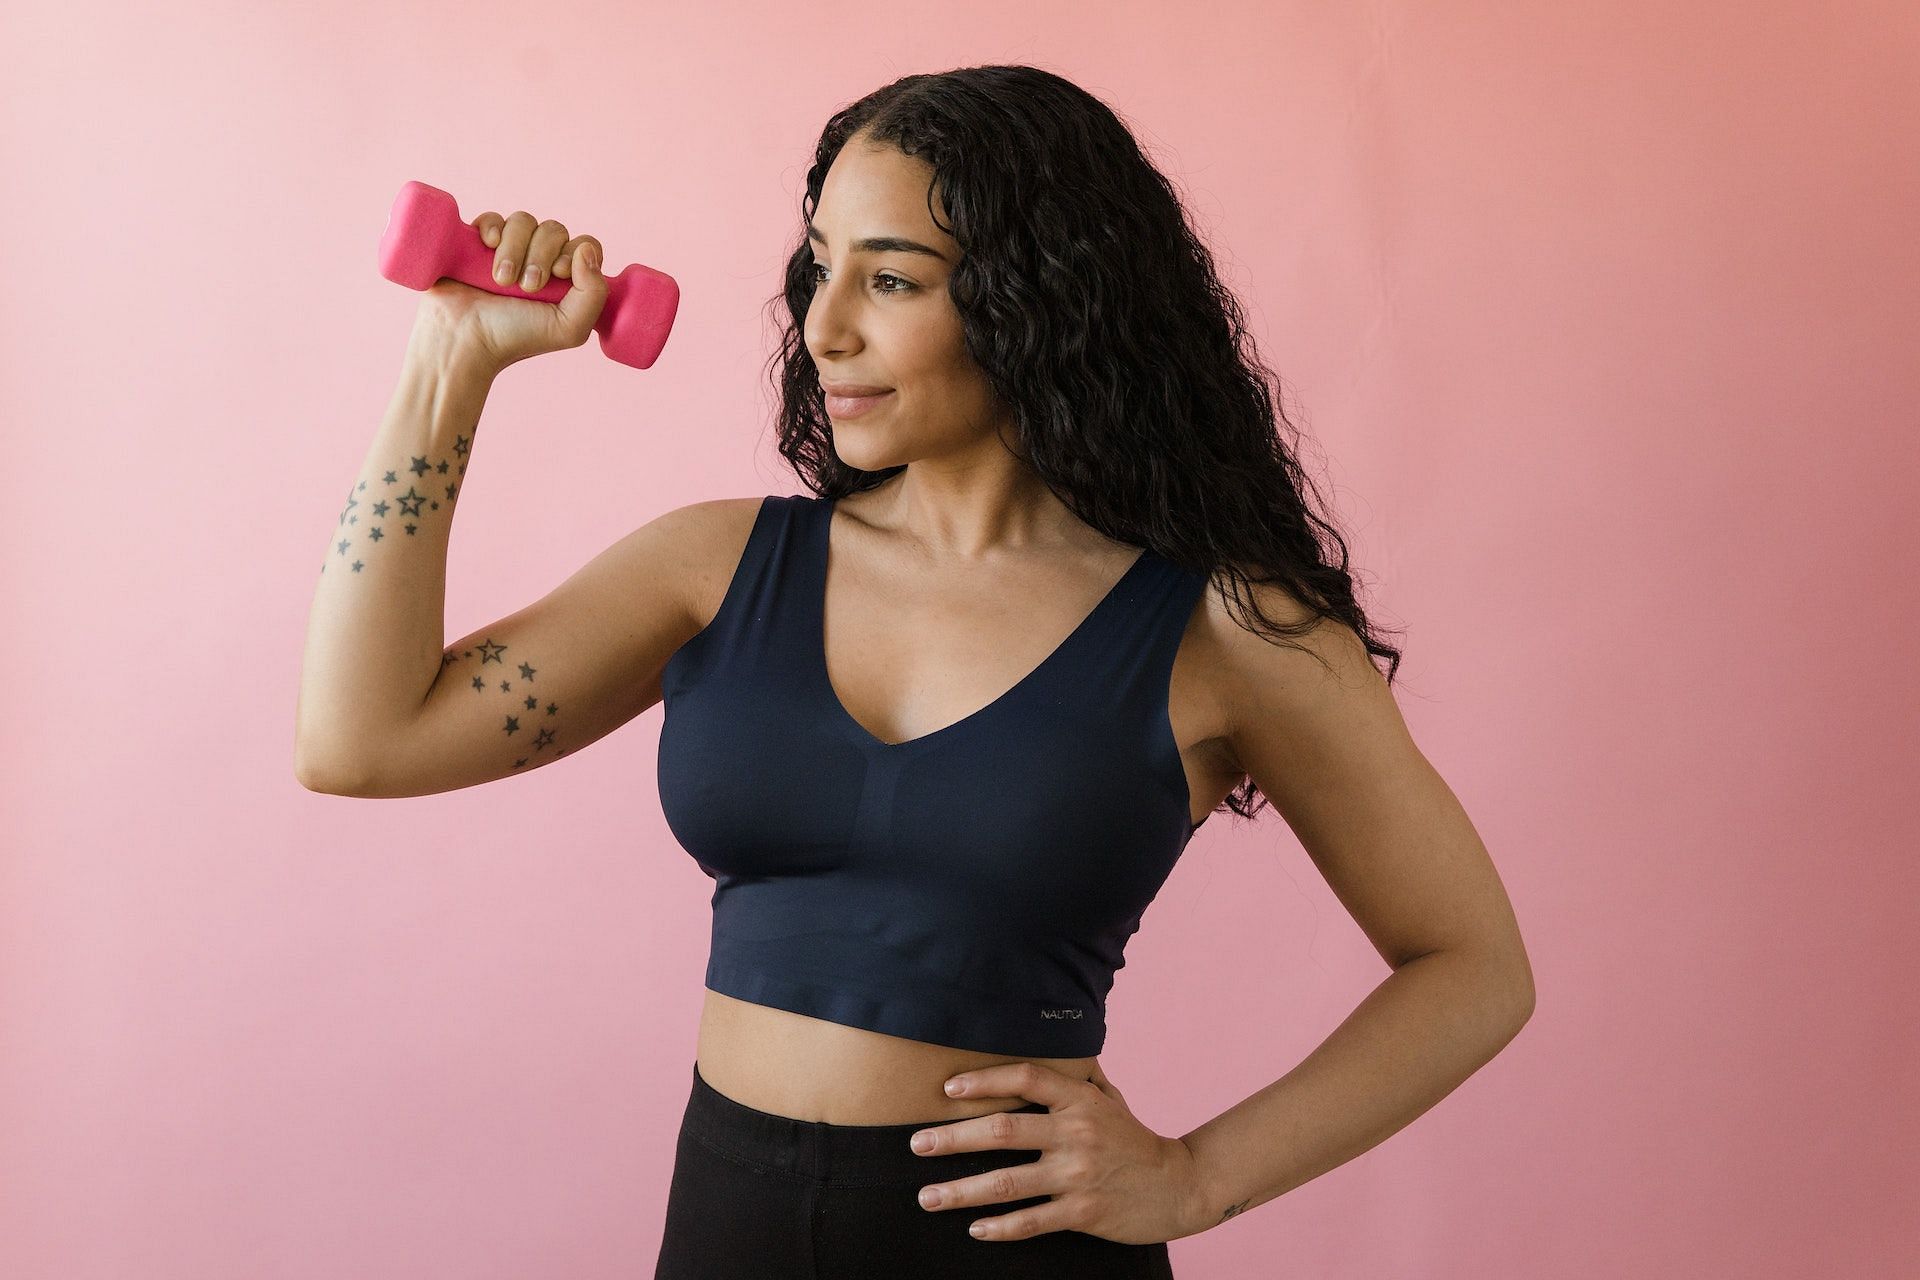 HIIT exercises with dumbbells are great for improving muscle strength. (Photo by RODNAE Productions via pexels)